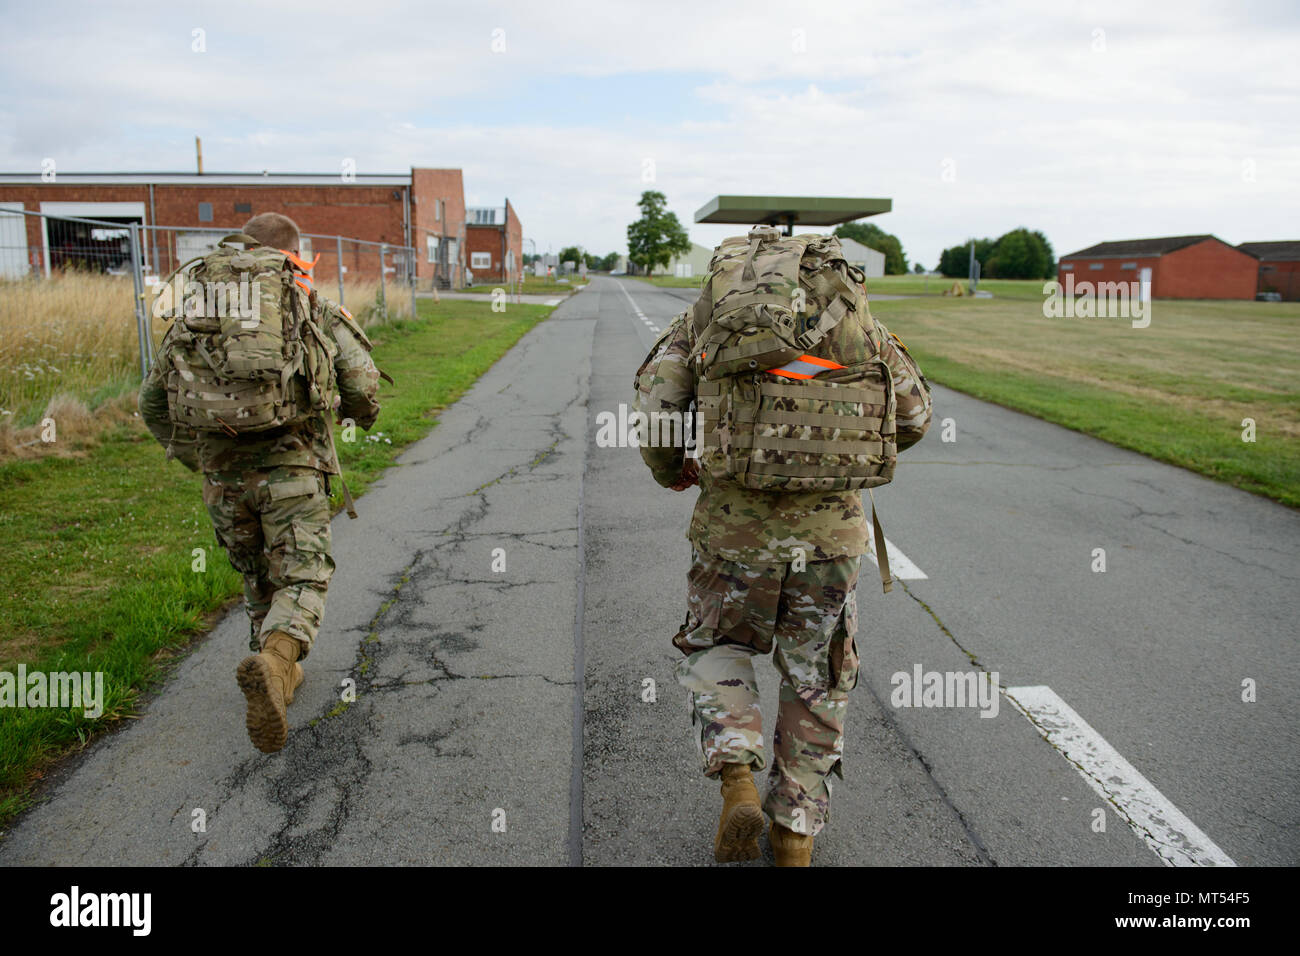 U.S. Soldiers assigned to Headquarters and Headquarters Company, Allied Forces North Battalion, take care of their physical condition by performing a 9-mile ruck march on Chièvres Air Base, Belgium, July 20, 2017. (U.S. Army photo by Visual Information Specialist Pierre-Etienne Courtejoie) Stock Photo